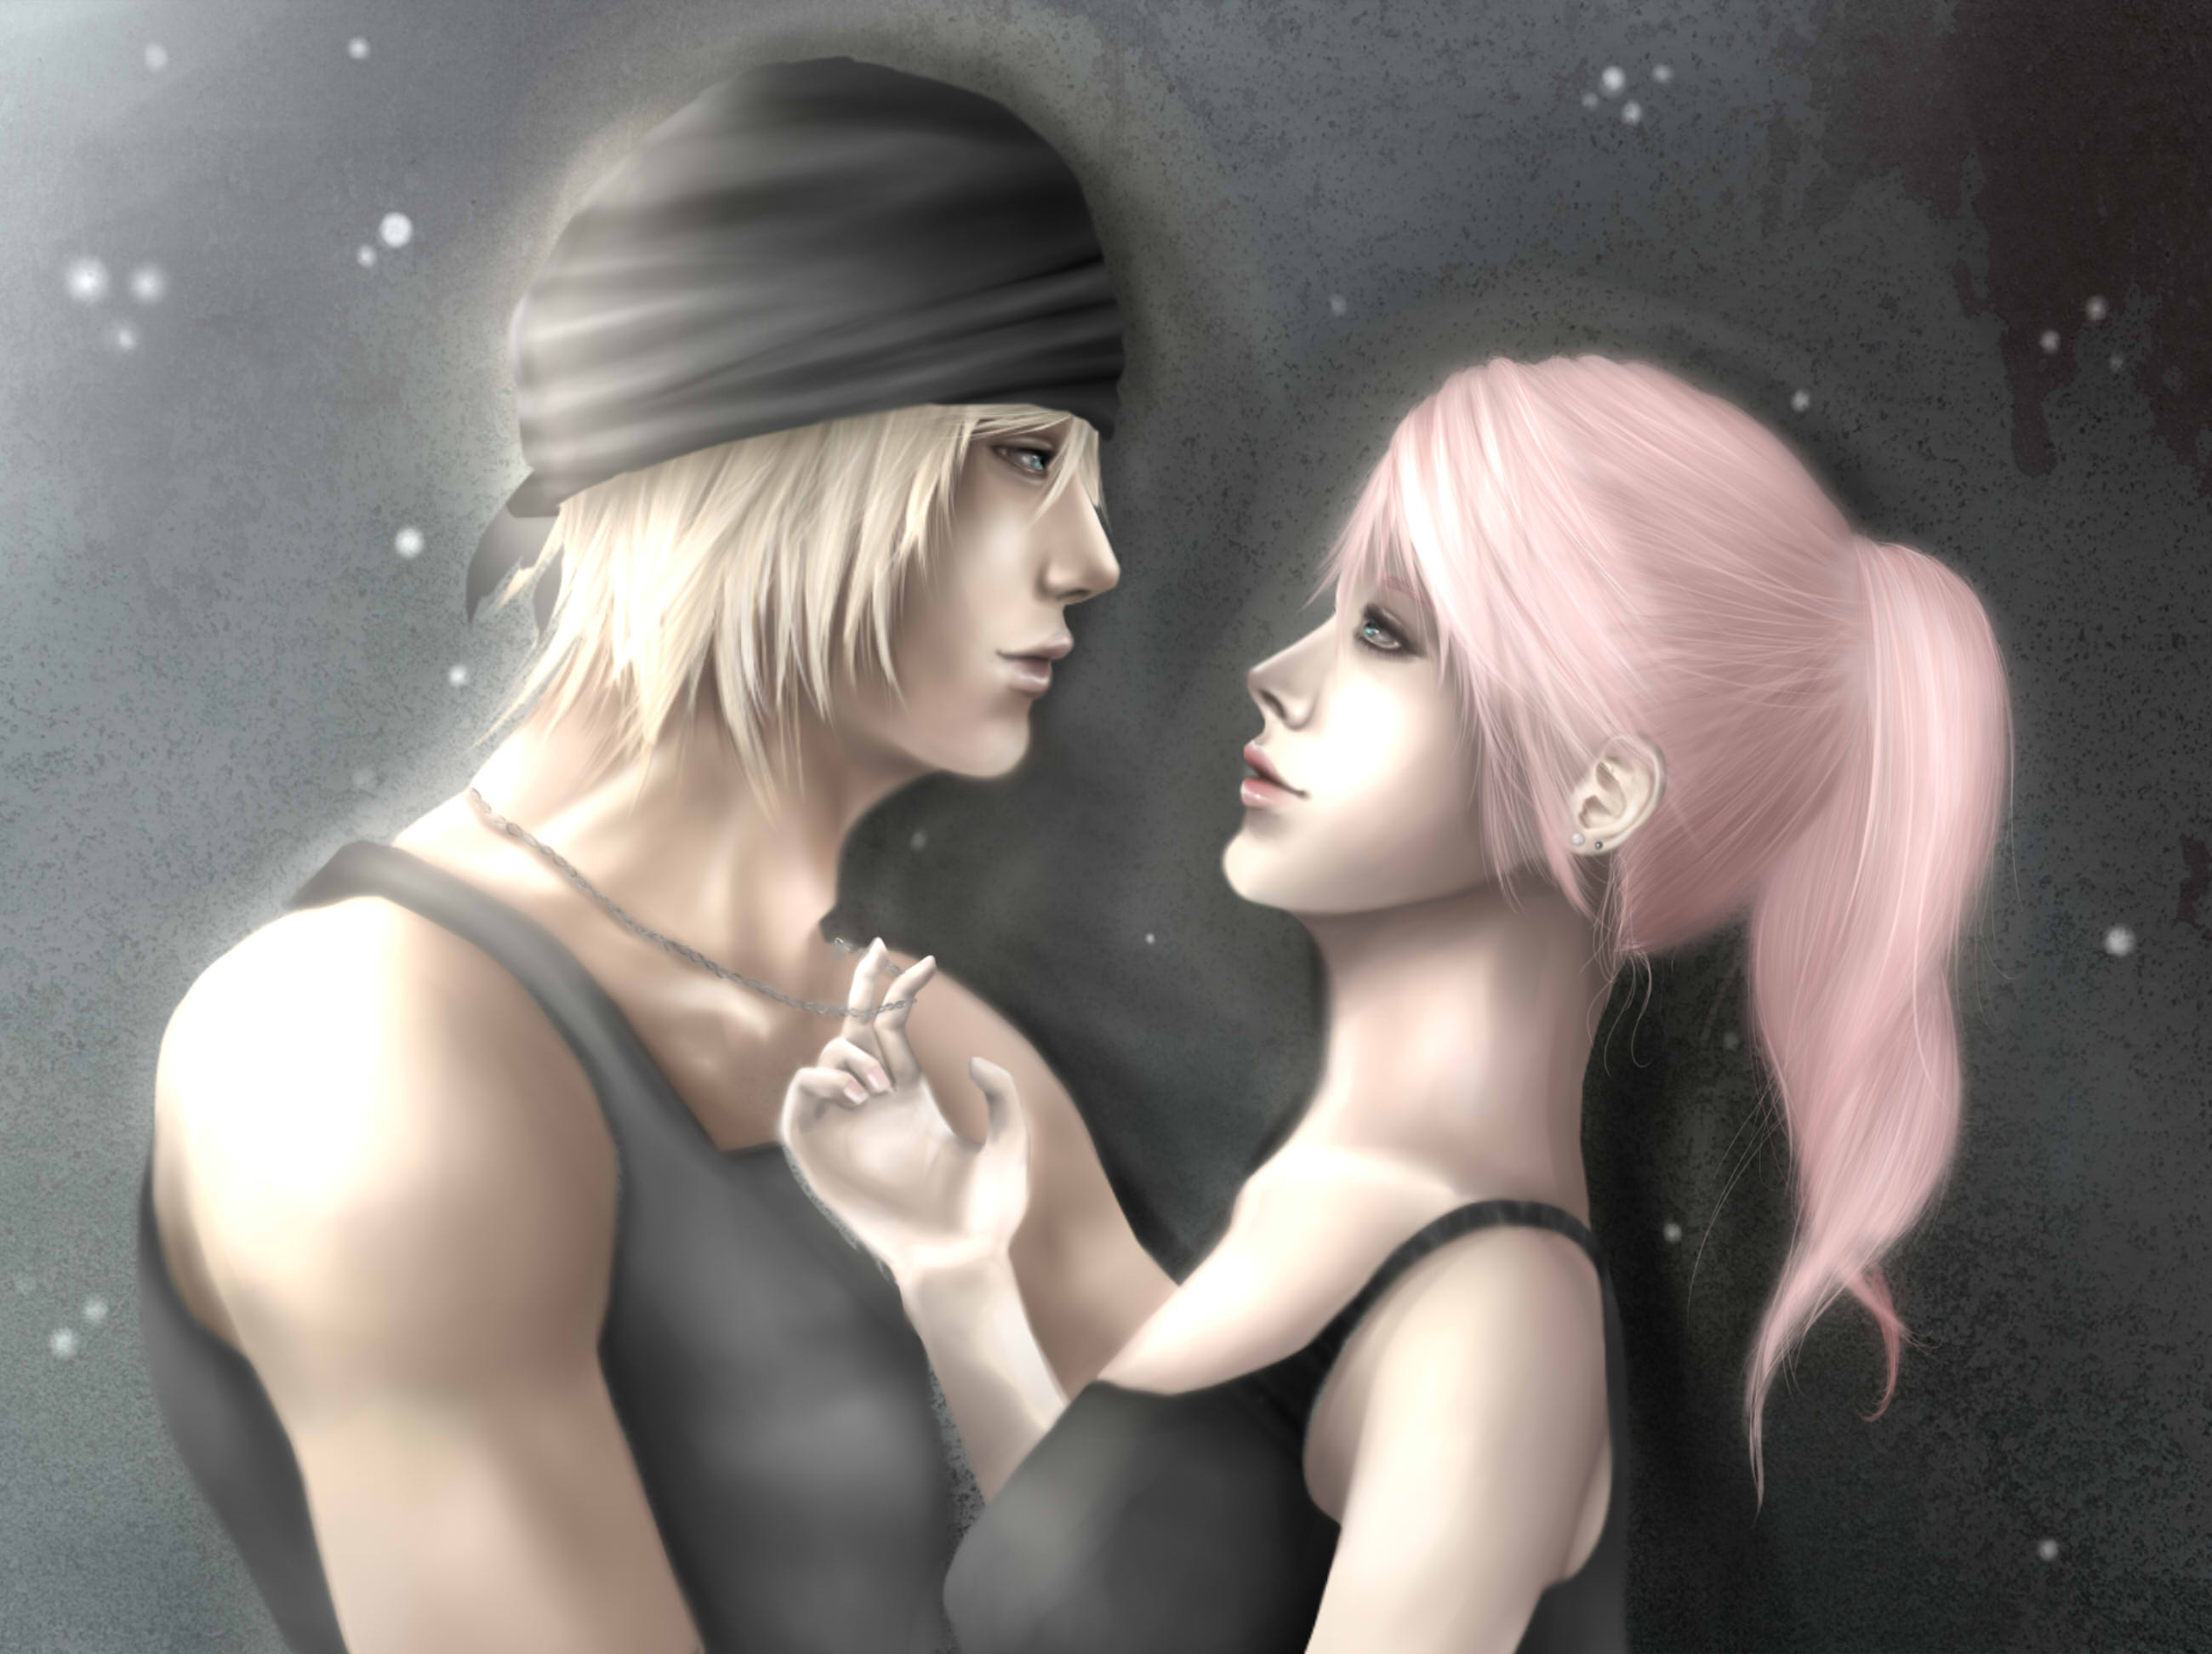 FFXIII ~ Snow and Lightning by Orchid-of-Hope on DeviantArt